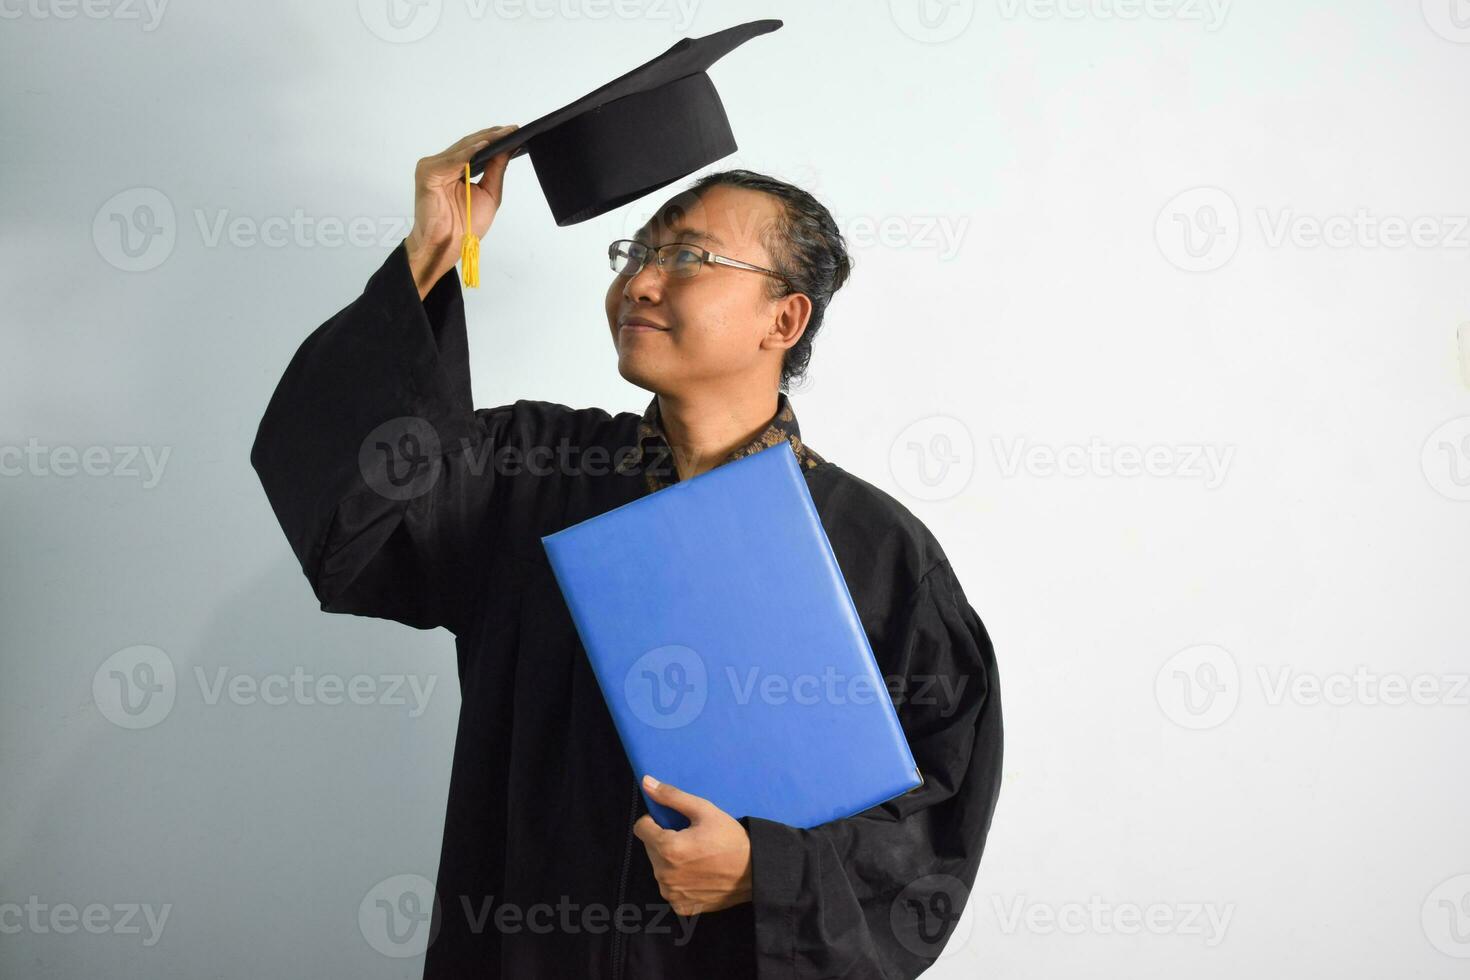 Expressive of Adult indonesia male wear graduation robe, hat and eyeglasses, Asian Male graduation bring blank blue certificate isolated on white background, expressions of portrait graduation photo